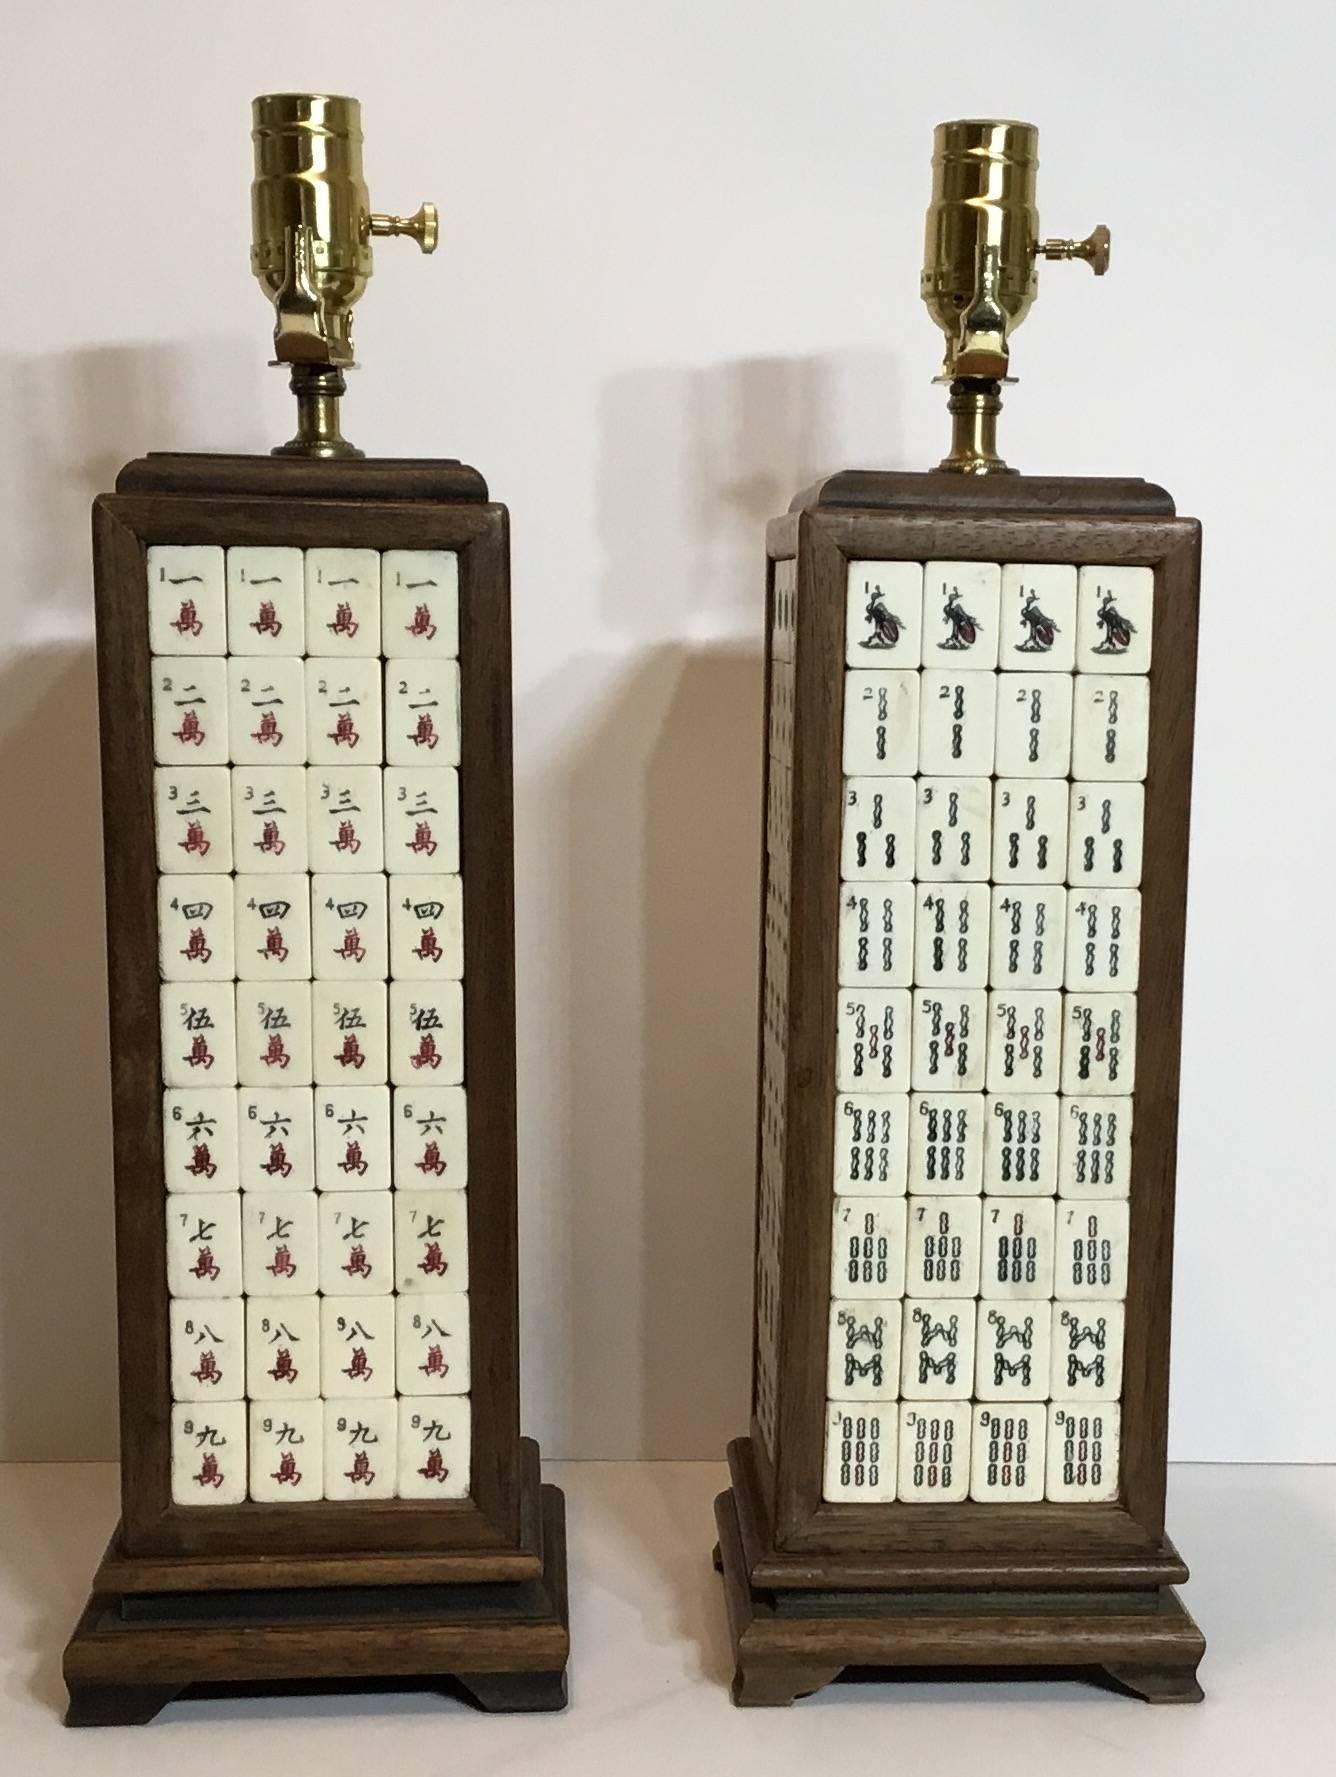 Funky pair of table lamps made of vintage tiles of Mahjong game, put together
In a very crafty wood frames, to become a one of a kind table lamp to all Mahjong game lovers, players.
Great conversation piece.